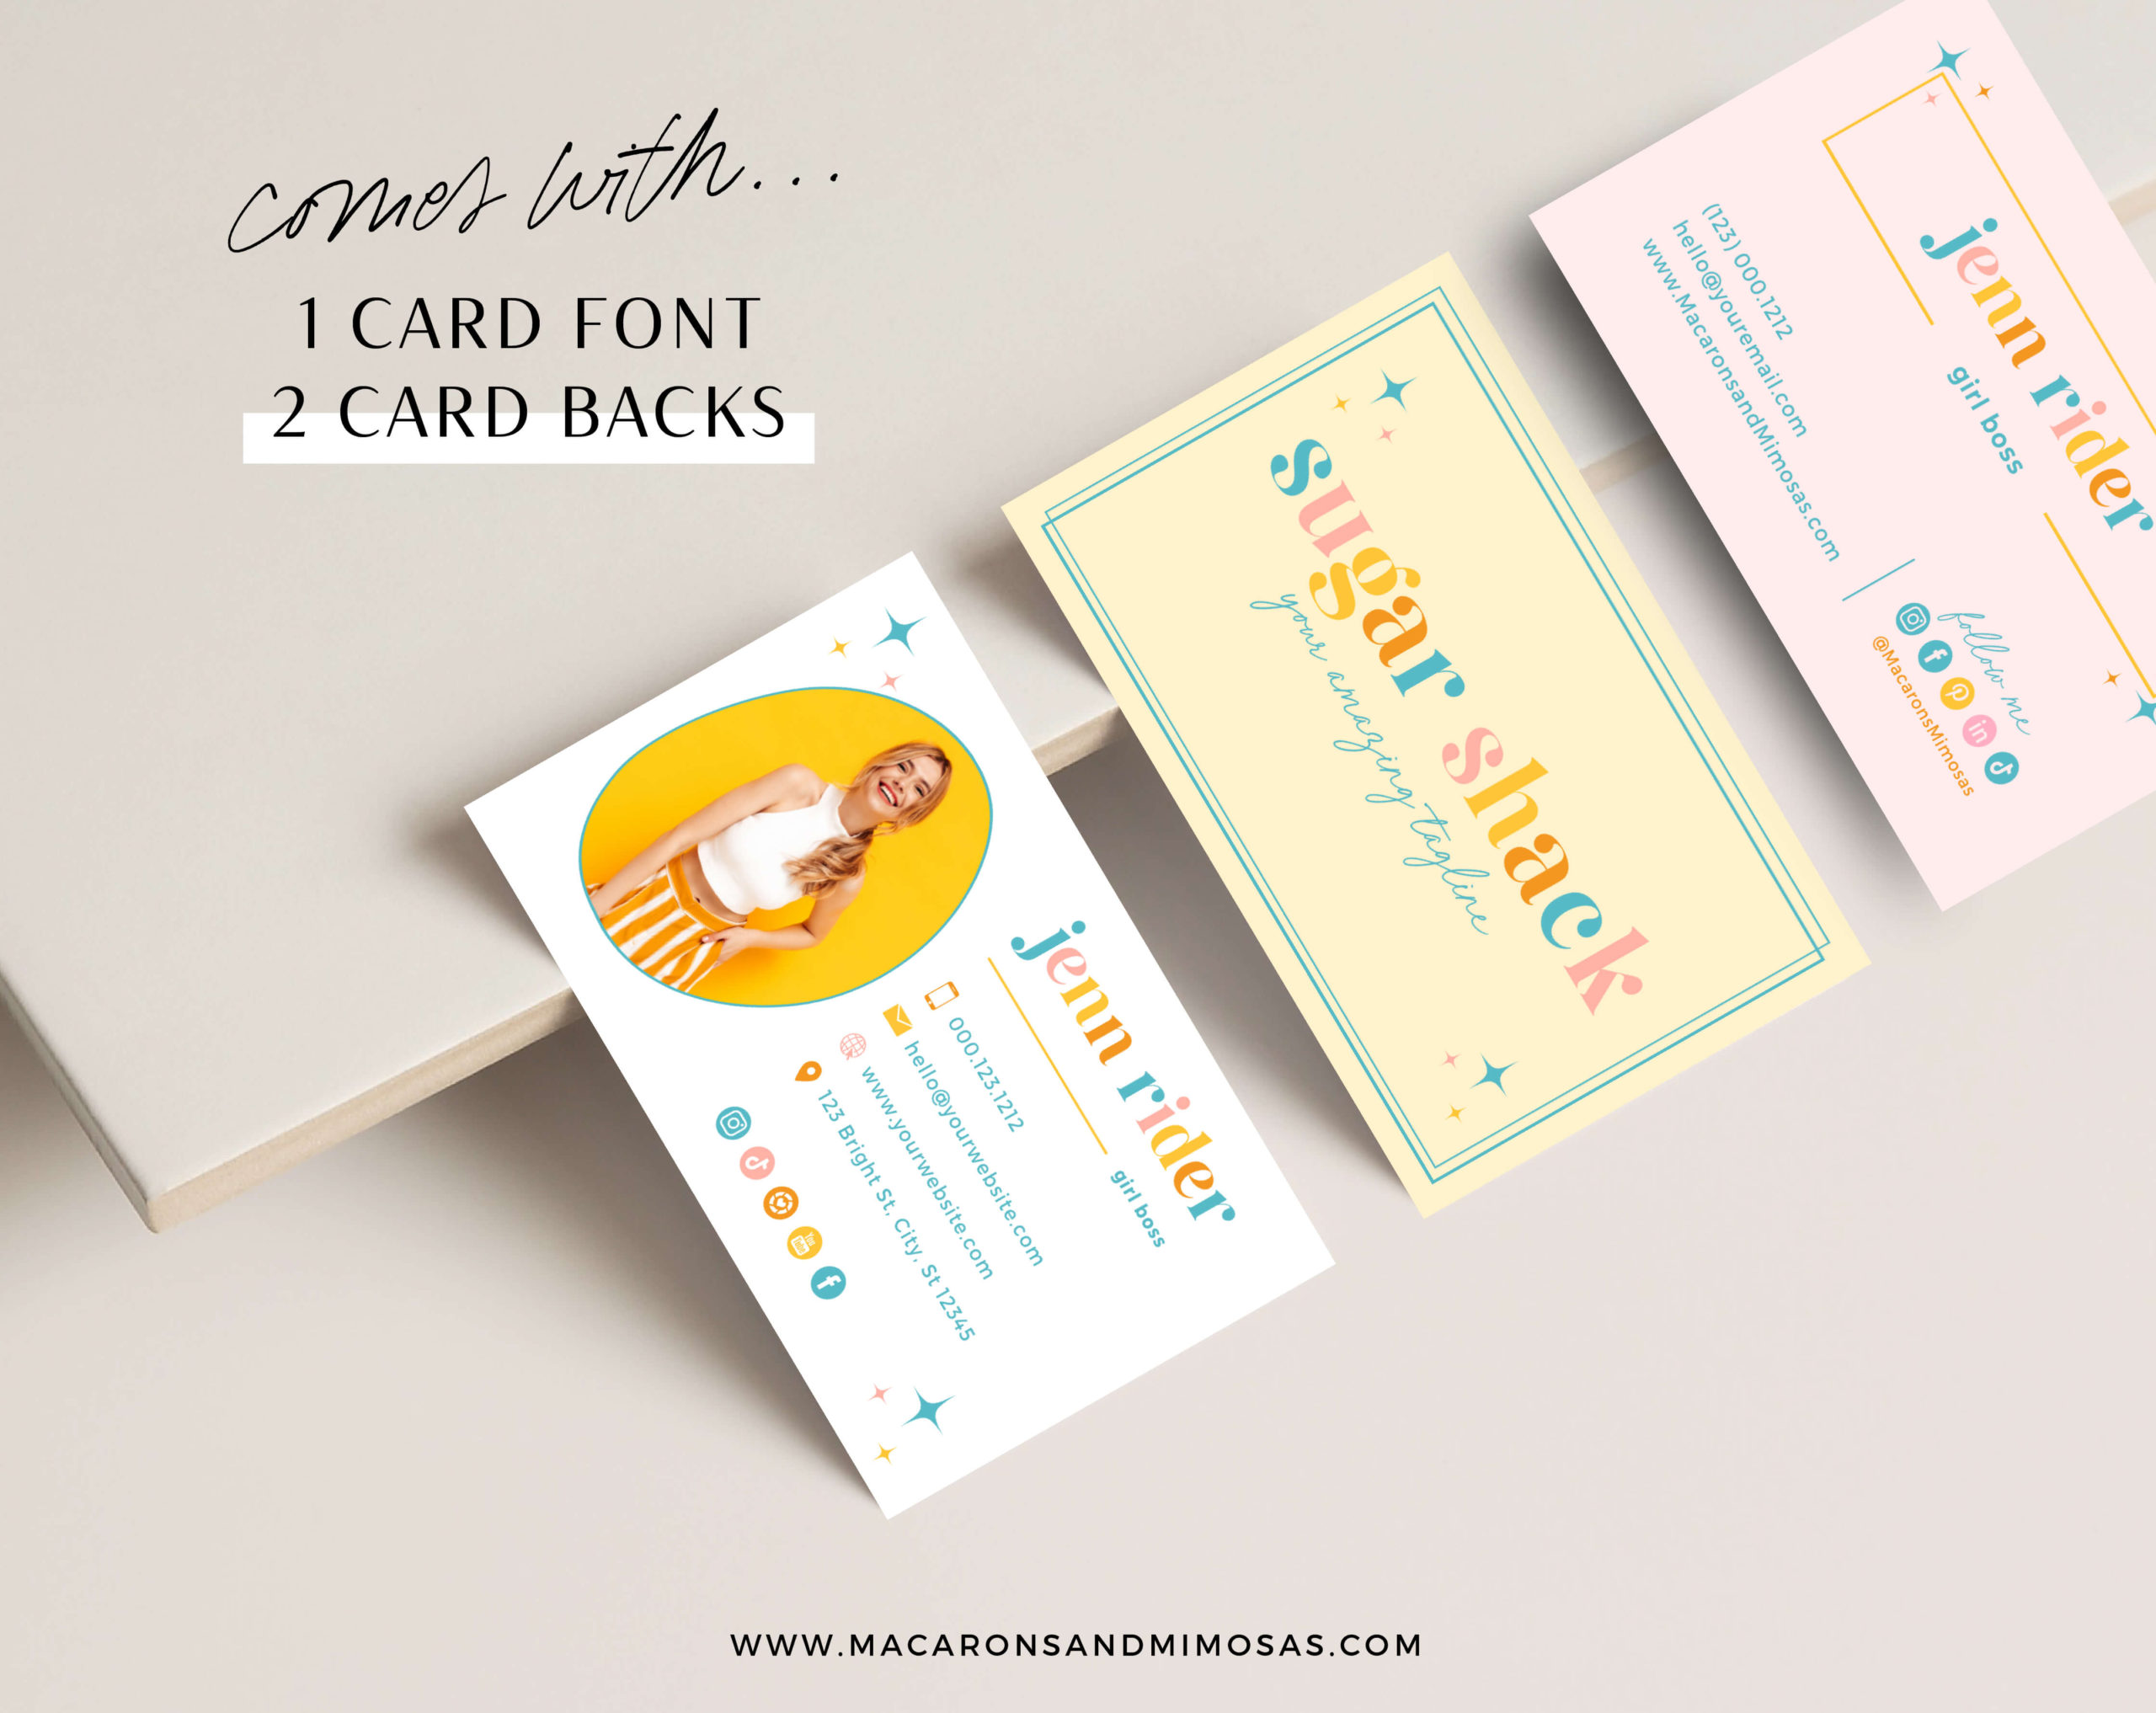 Bright Retro Digital Business Card Template editable in Canva with clickable links, How to create DIY Retro Colorful Pink Teal Digital Business Card